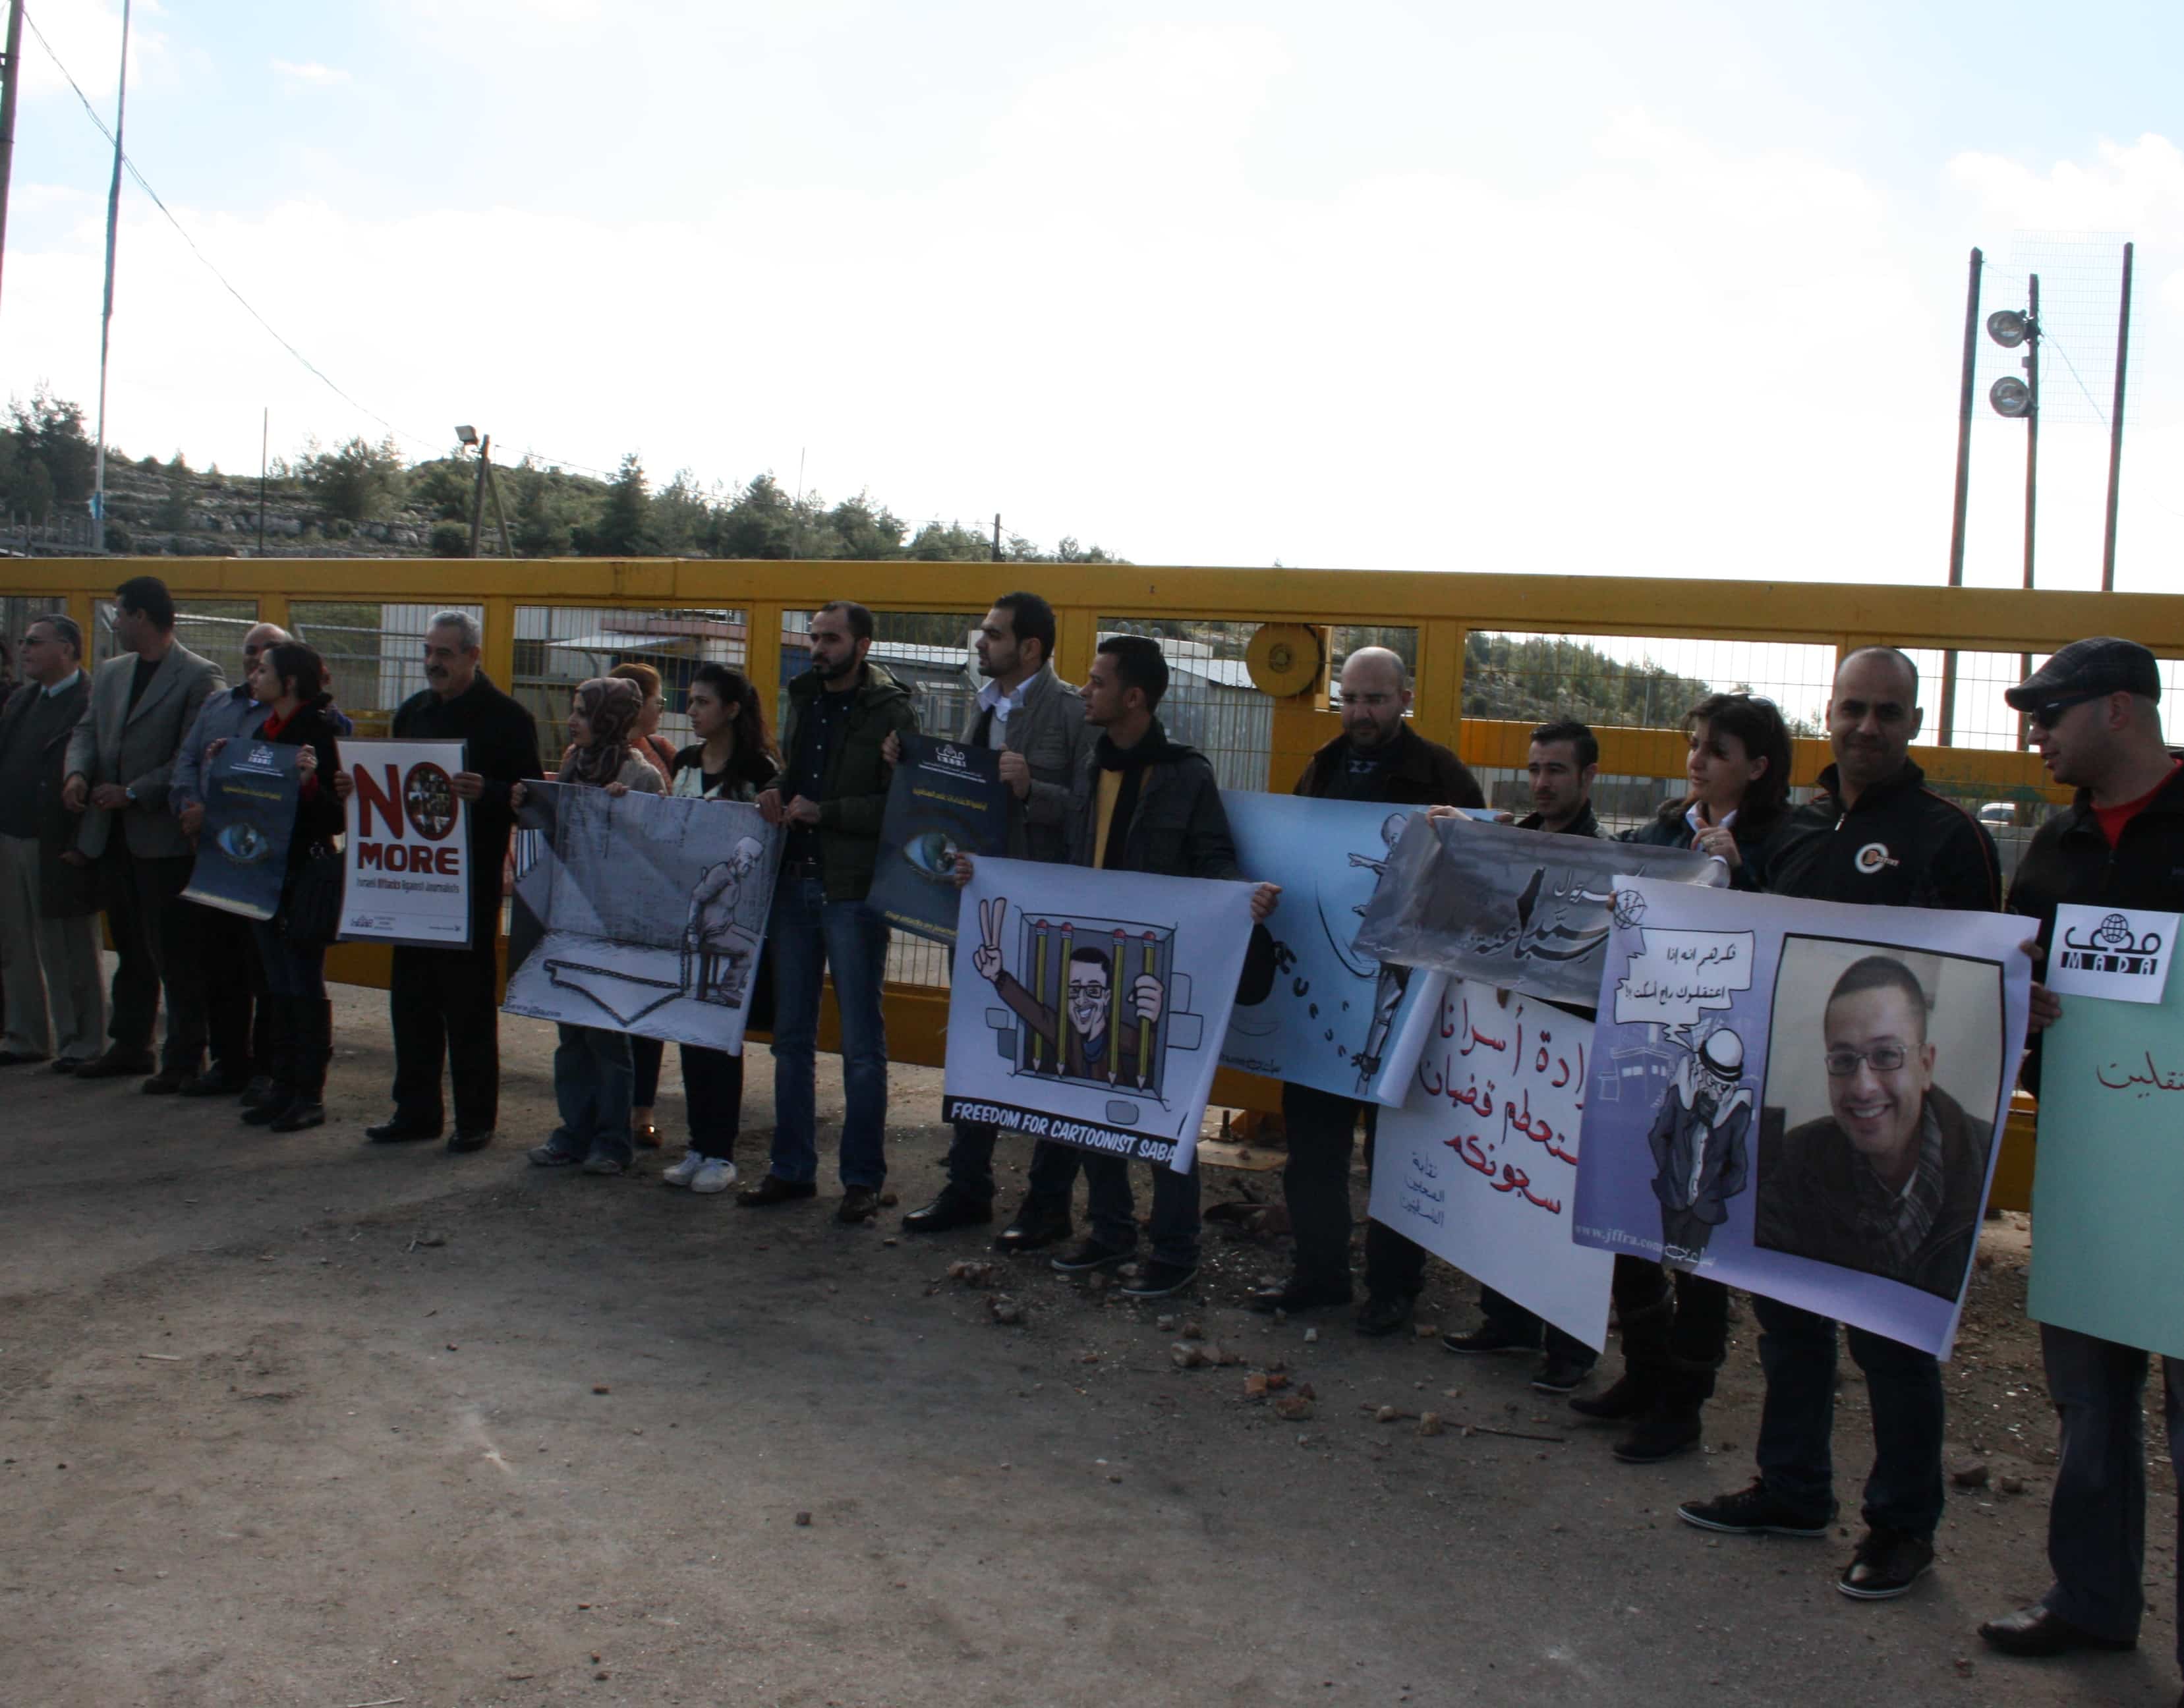 The Palestinian Center for Developments and Media Freedoms organised a demonstration on 20 February 2013 in front of Ofer prison protesting against the Israeli forces' detention of journalists, MADA